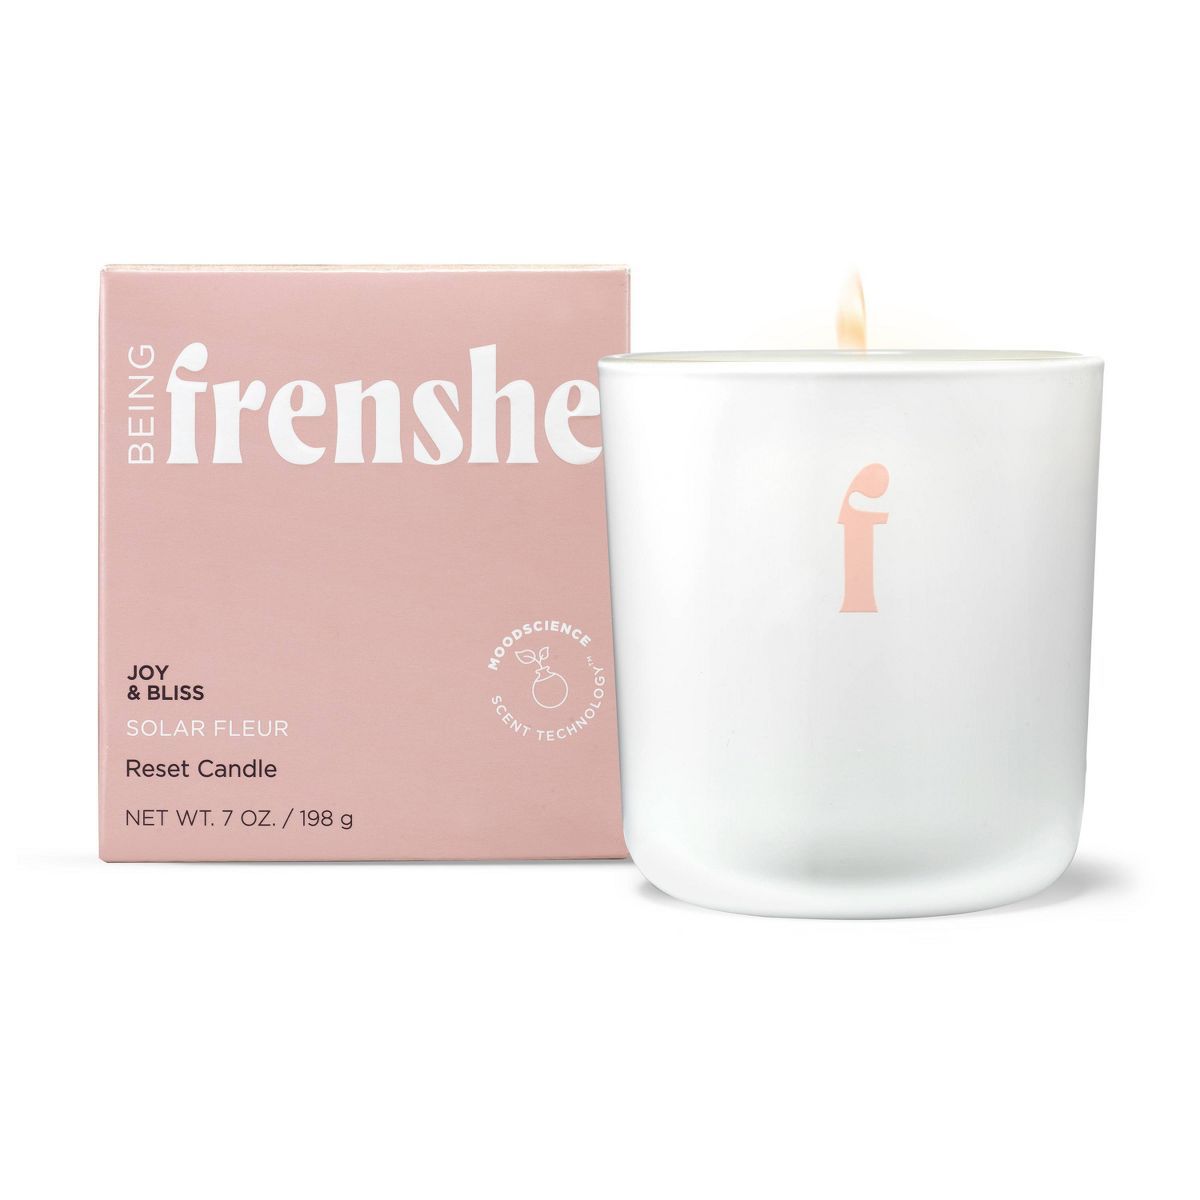 Being Frenshe Coconut & Soy Wax Reset Candle with Essential Oils - Solar Fleur - 7oz | Target